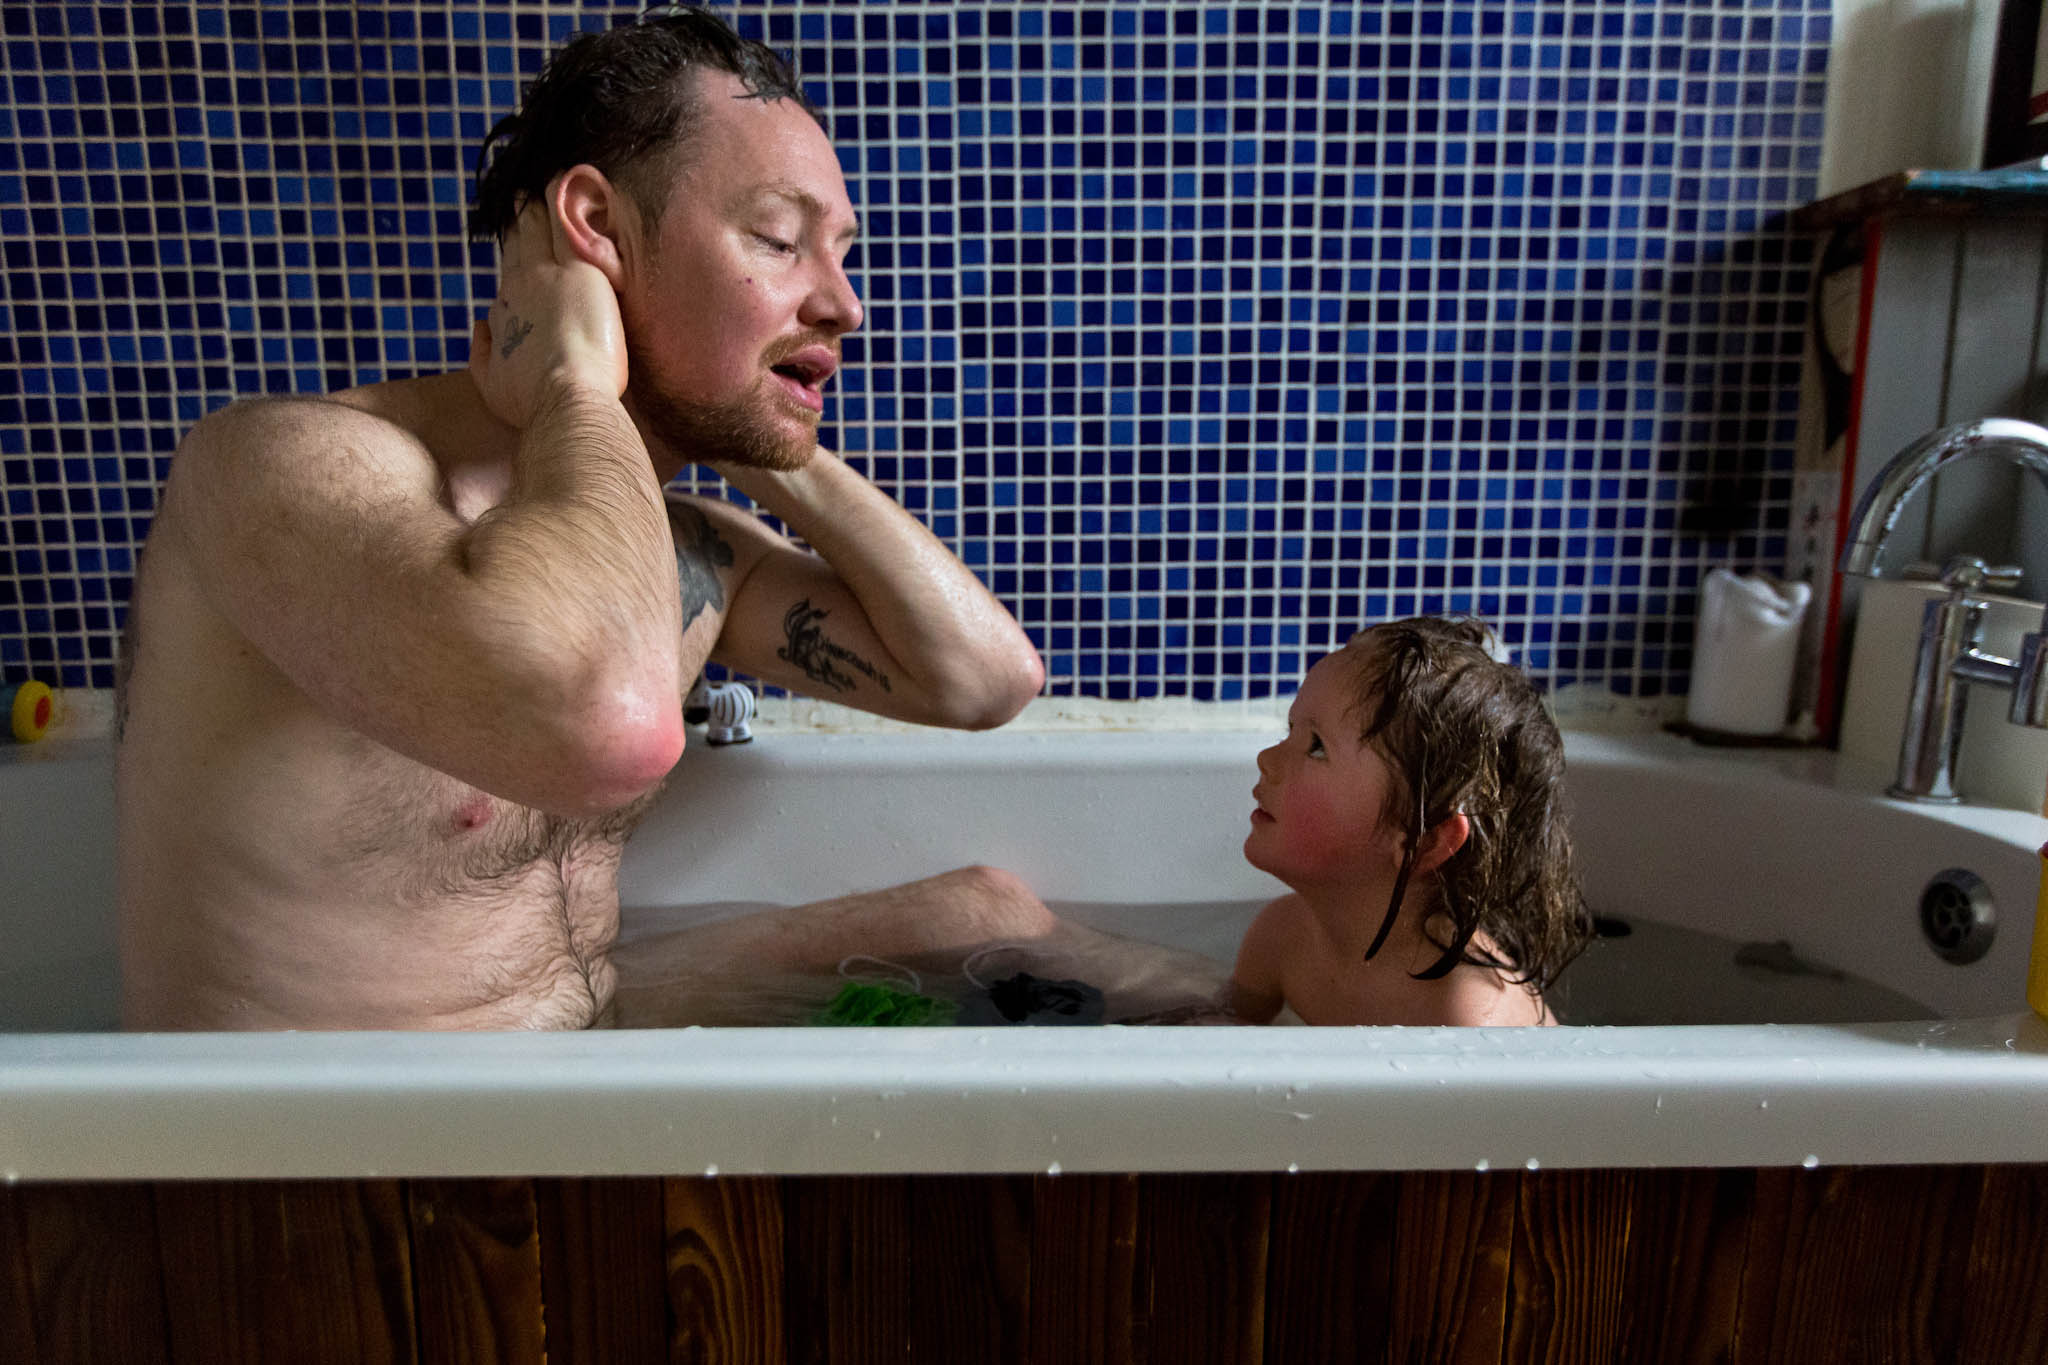 Father washing in the bath with baby daughter